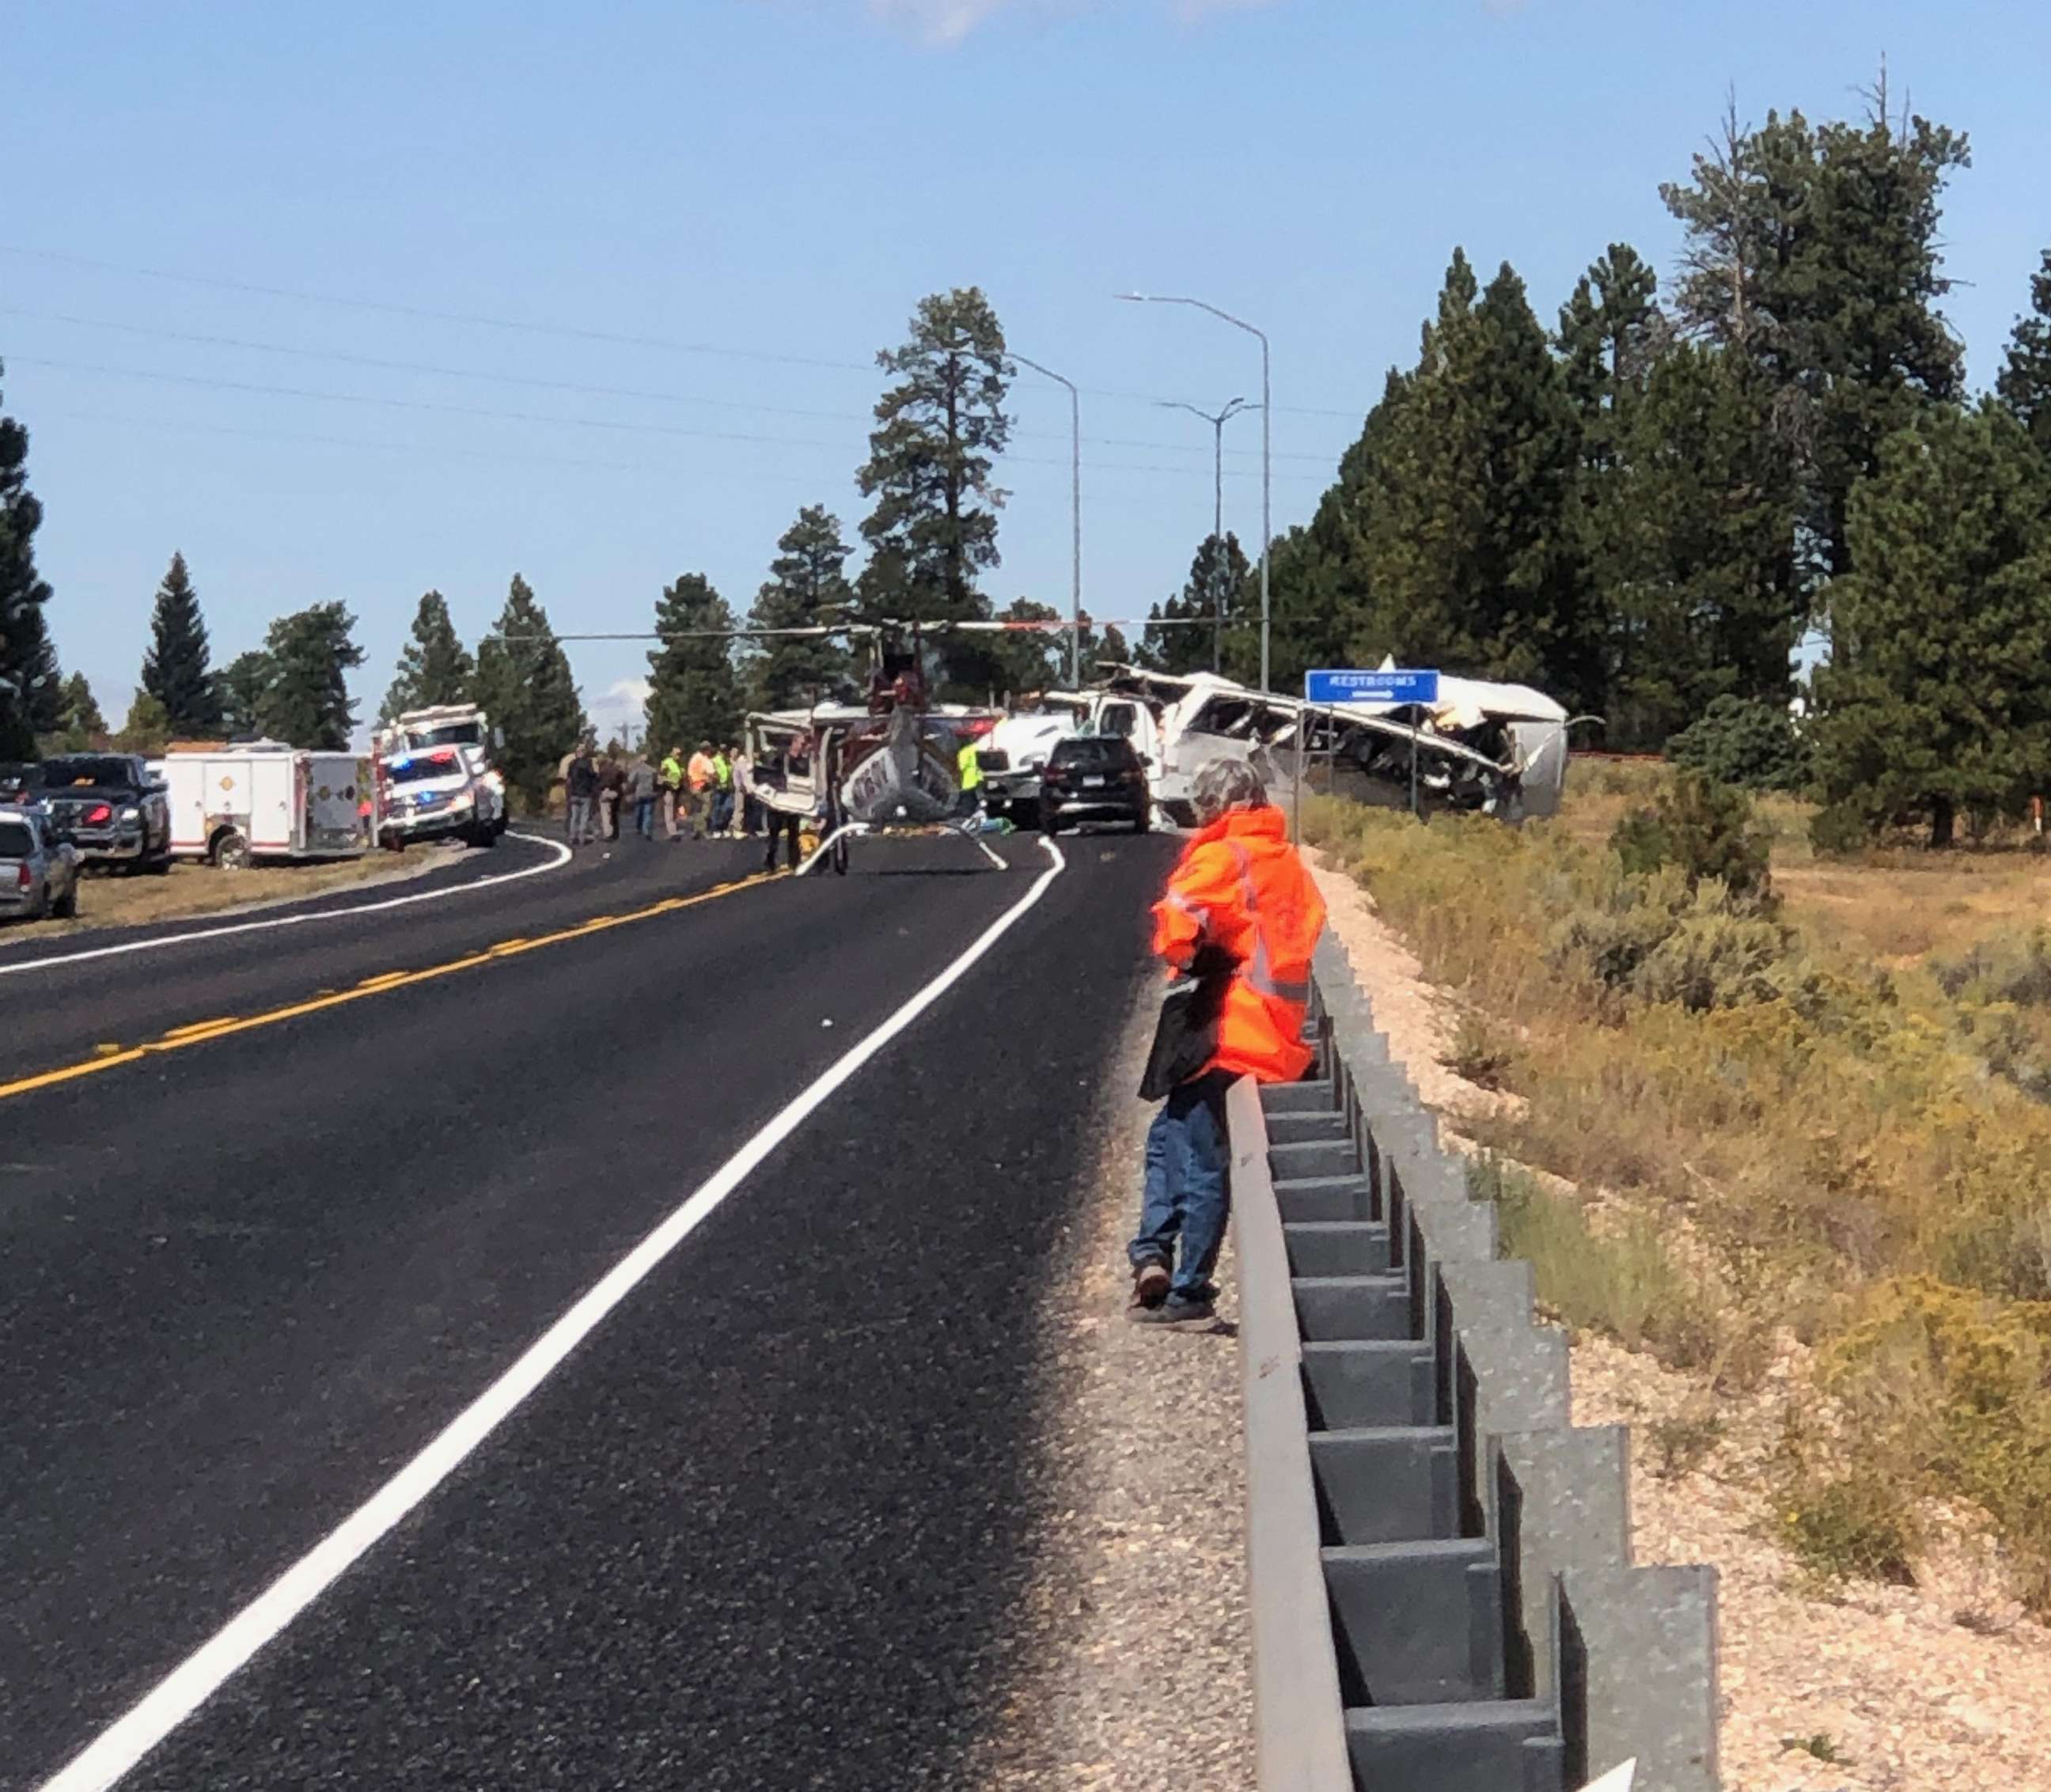 PHOTO: First responders work at the scene where a tour bus crashed near Bryce Canyon National Park on SR-12 in Utah, Sept. 20, 2019.